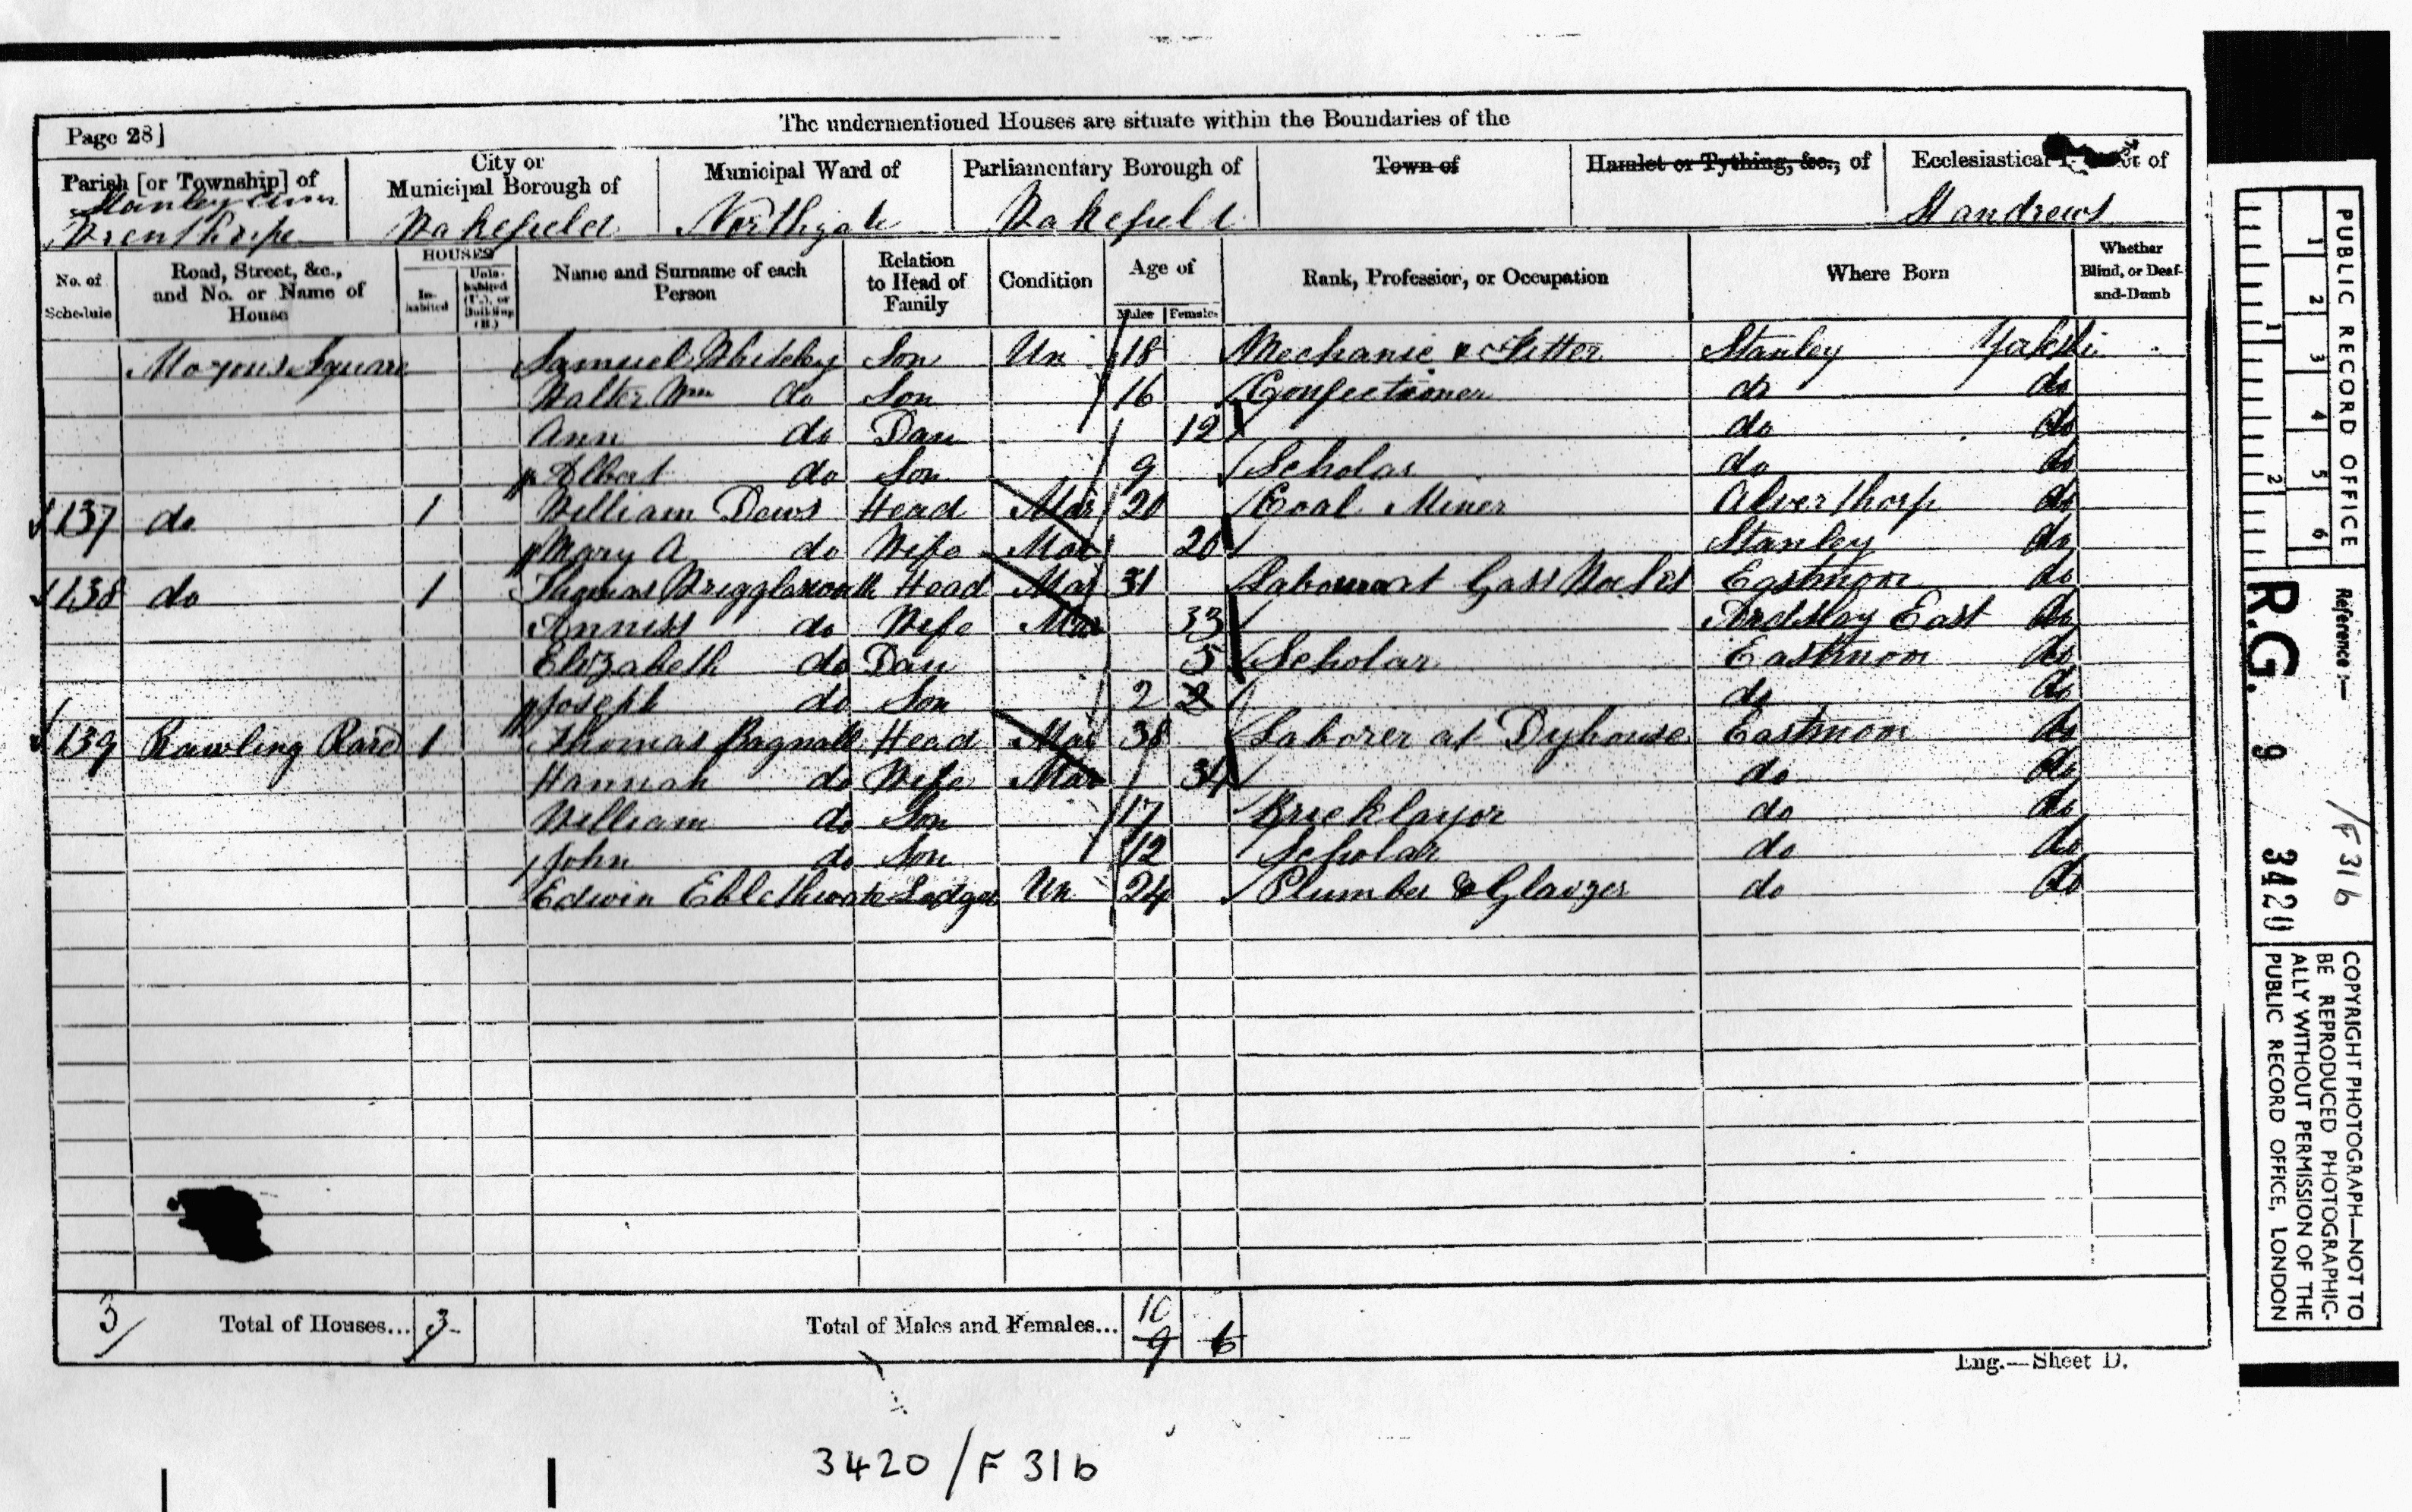 1861 Census entry for Thomas and Hannah Bagnall Household